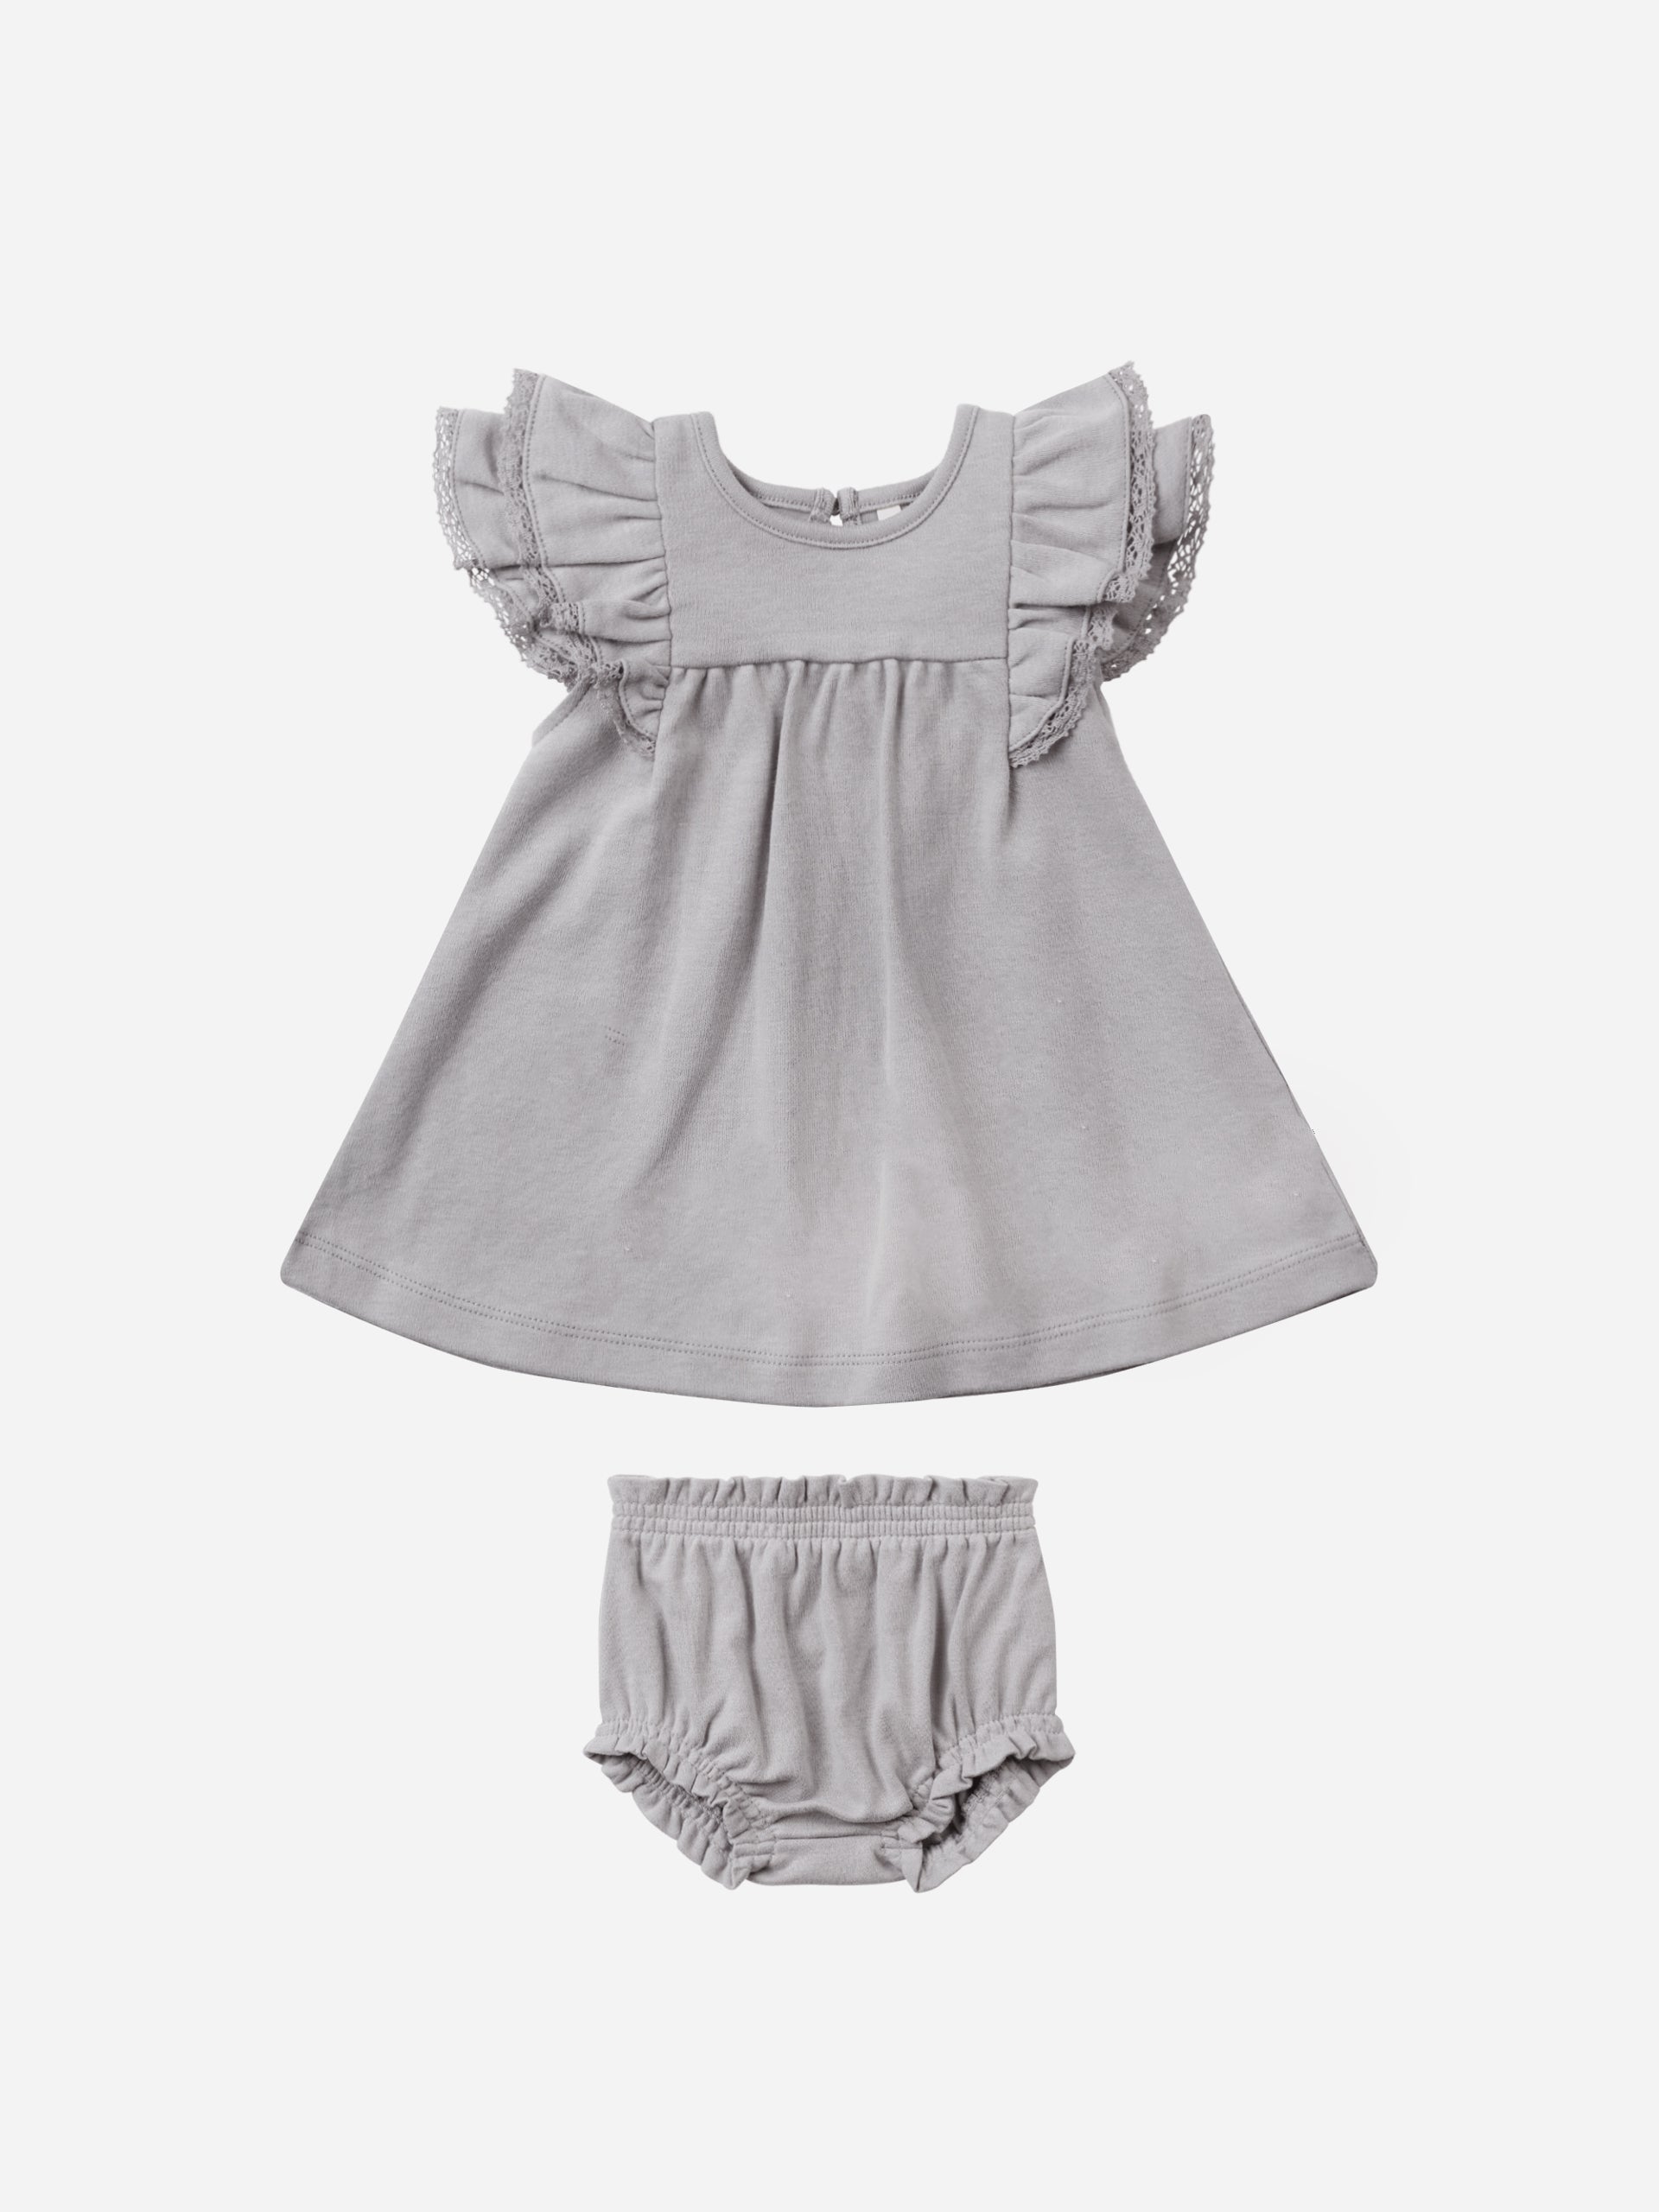 Flutter Dress || Periwinkle - Rylee + Cru | Kids Clothes | Trendy Baby Clothes | Modern Infant Outfits |